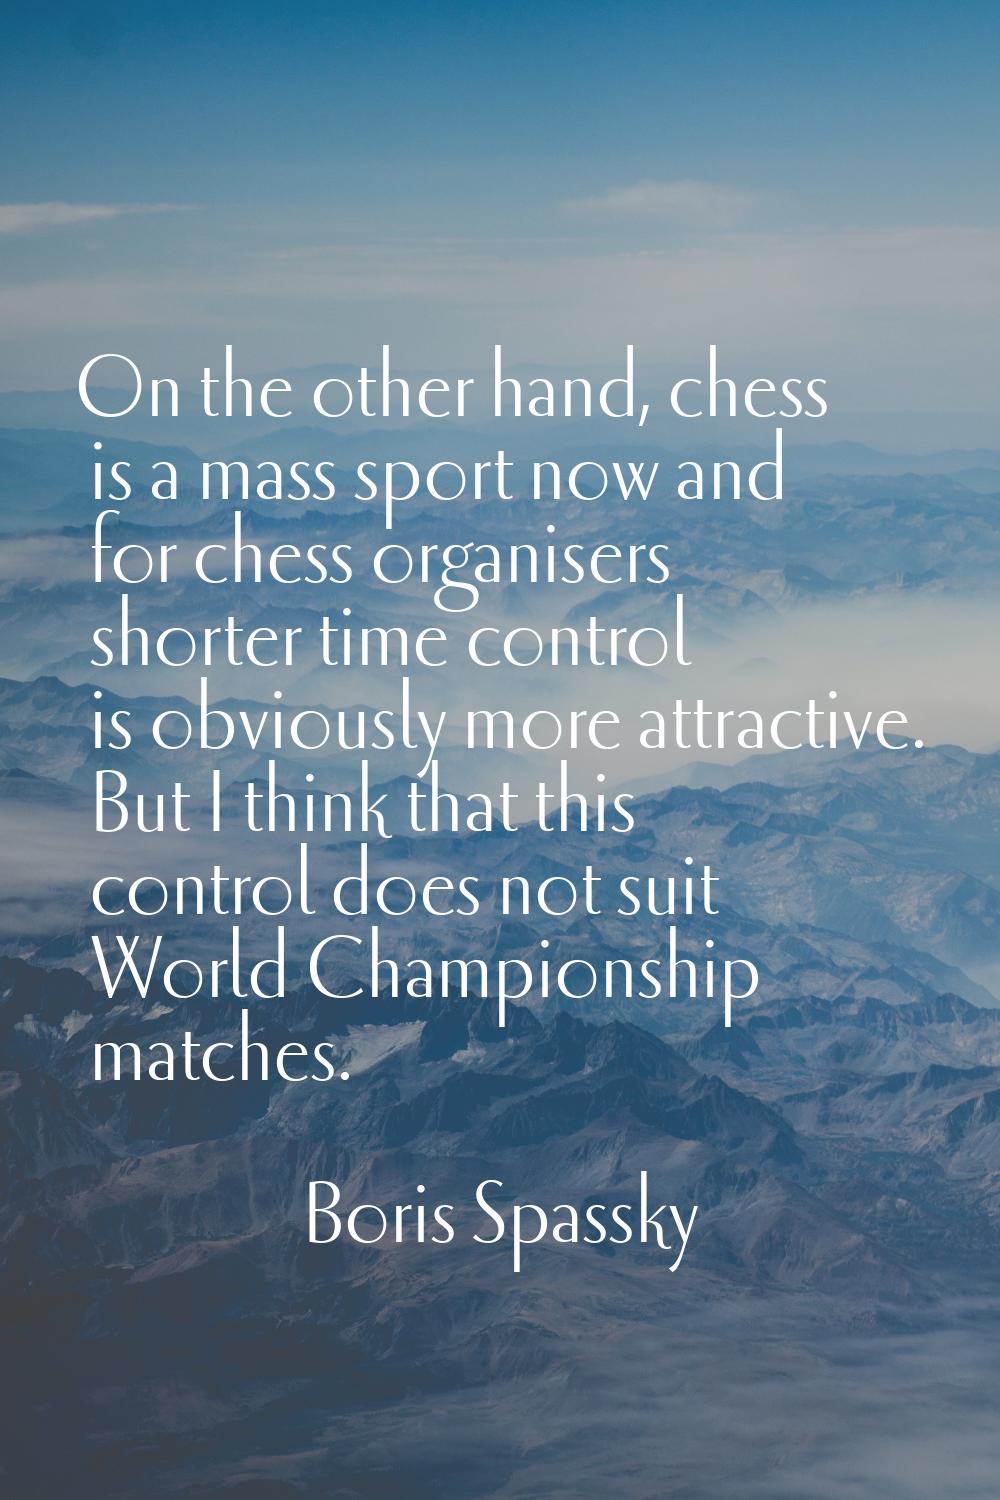 On the other hand, chess is a mass sport now and for chess organisers shorter time control is obvio